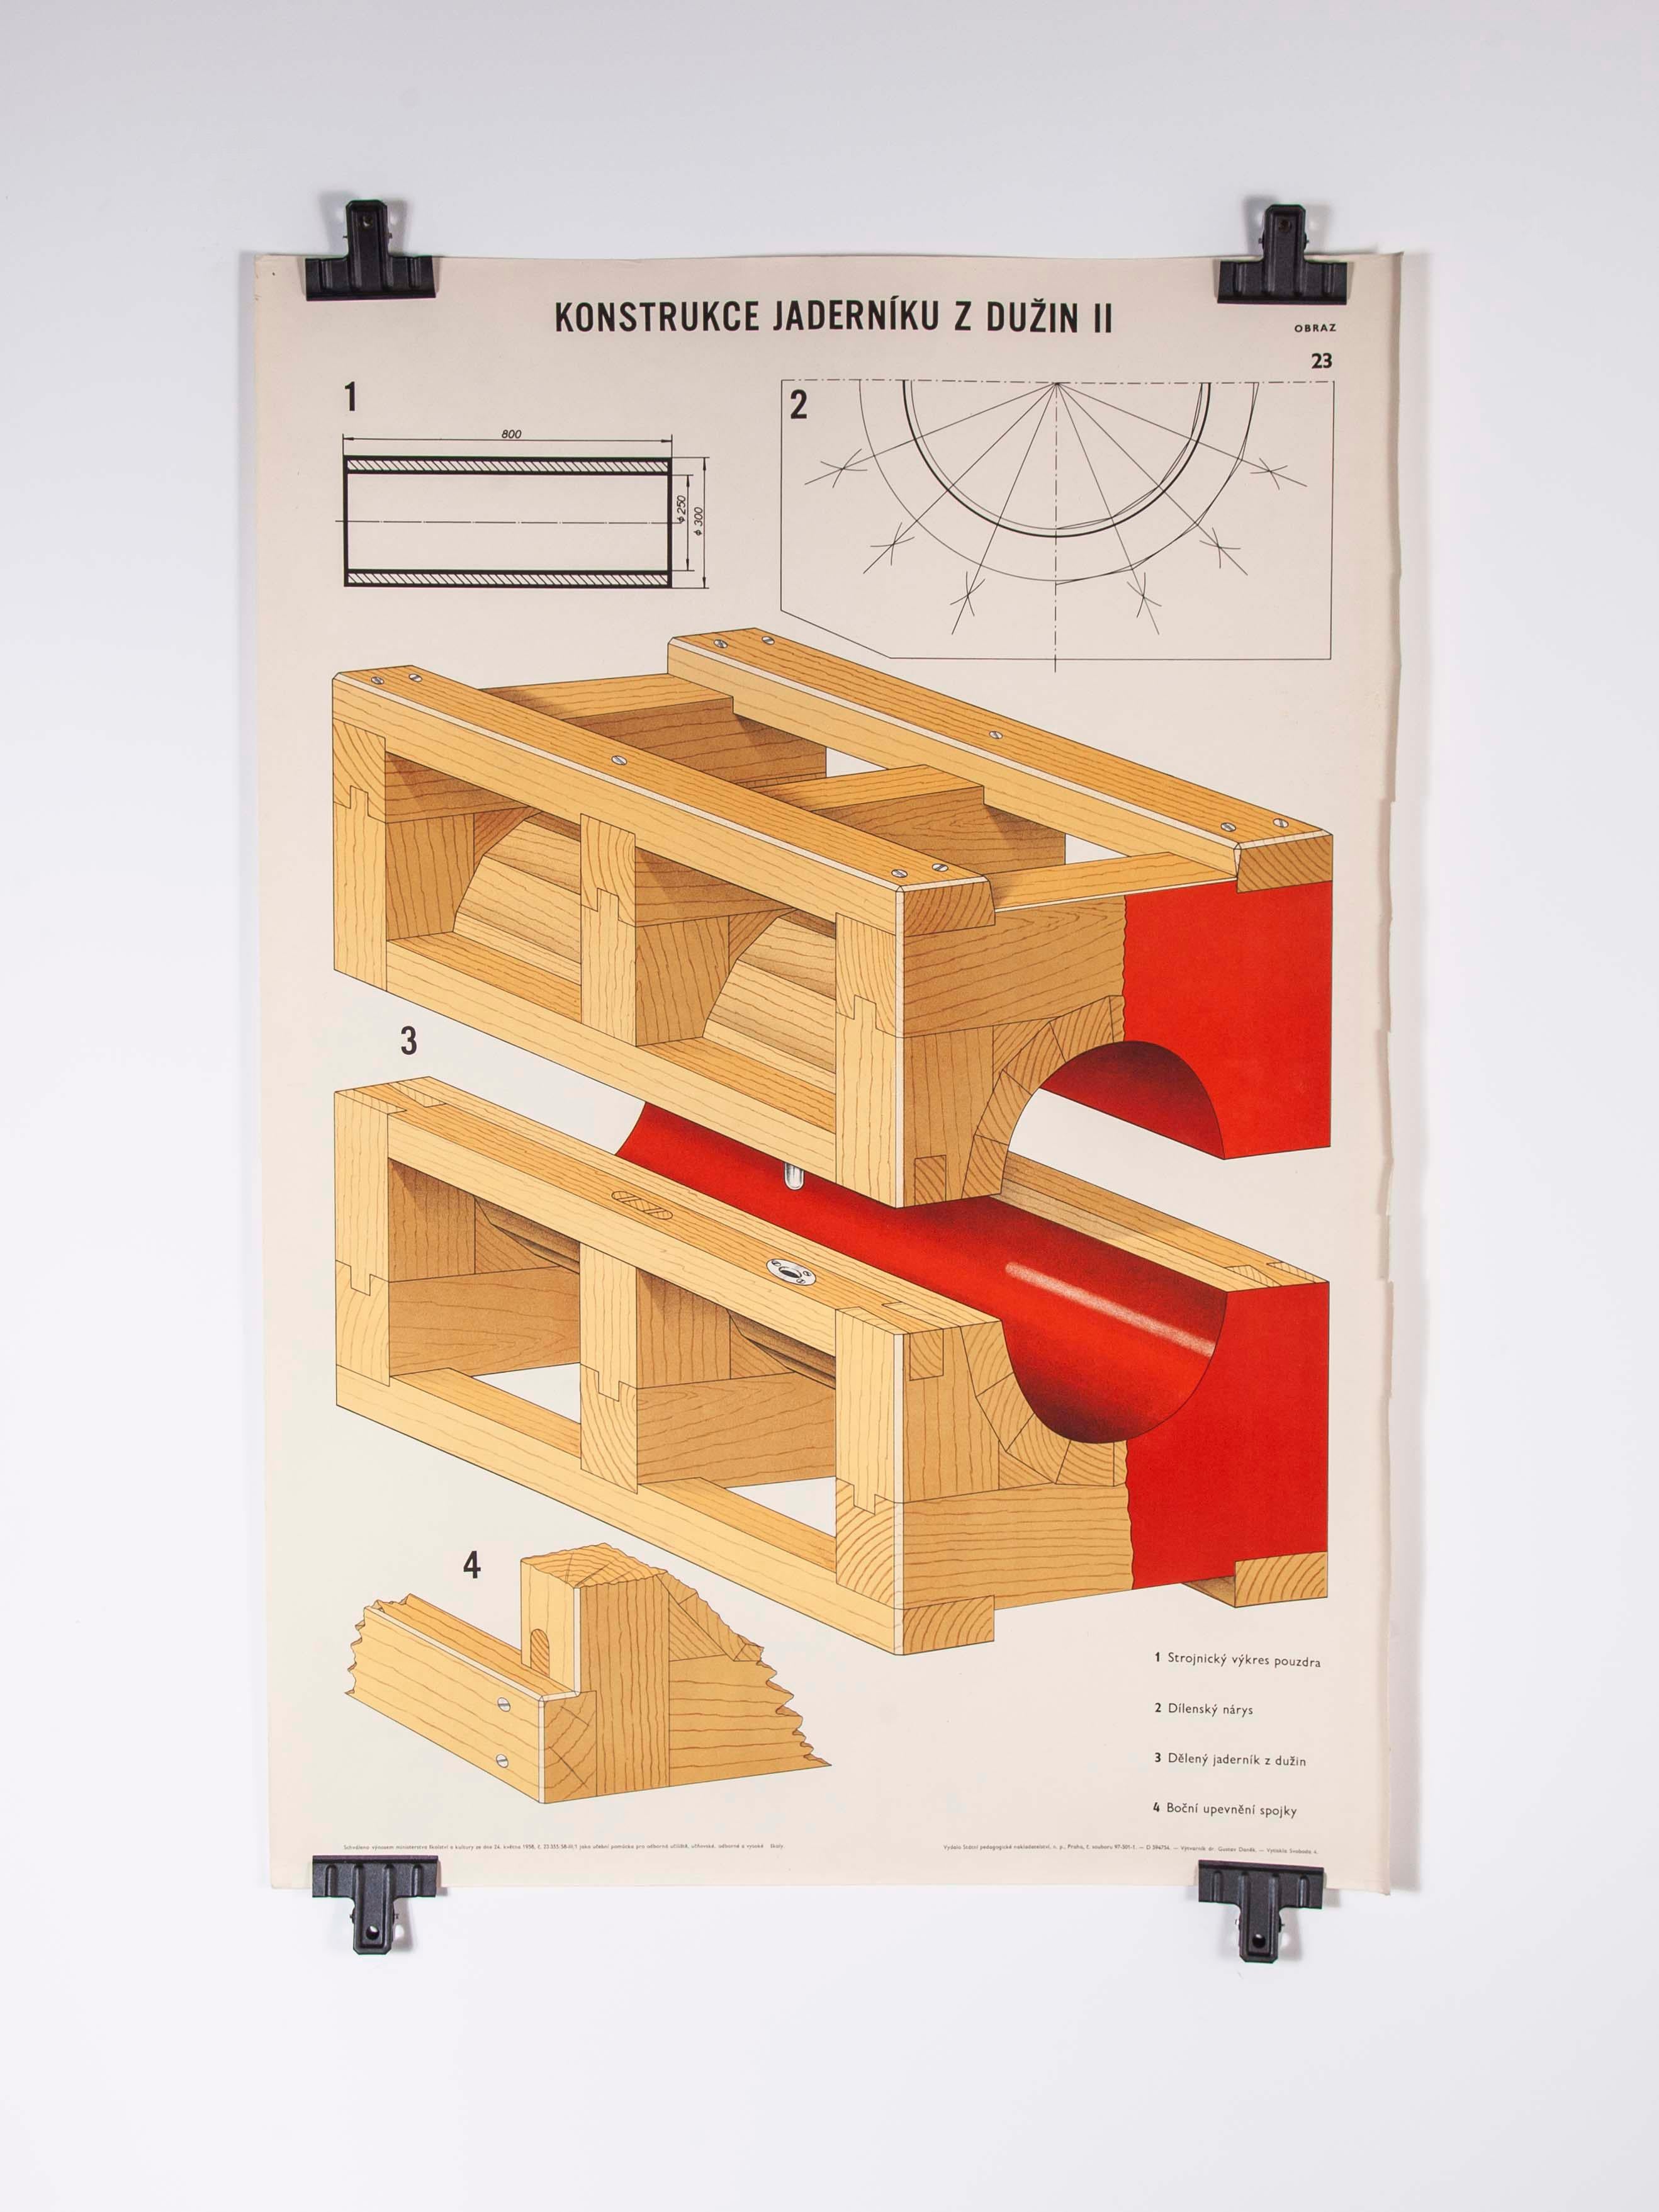 Czech technical industrial drawing – foundry mould engineering poster – 23

Sourced from an old engineering workshop in the Czech Republic, an amazing series of technical Industrial drawings explaining the process of sand casting and creating the